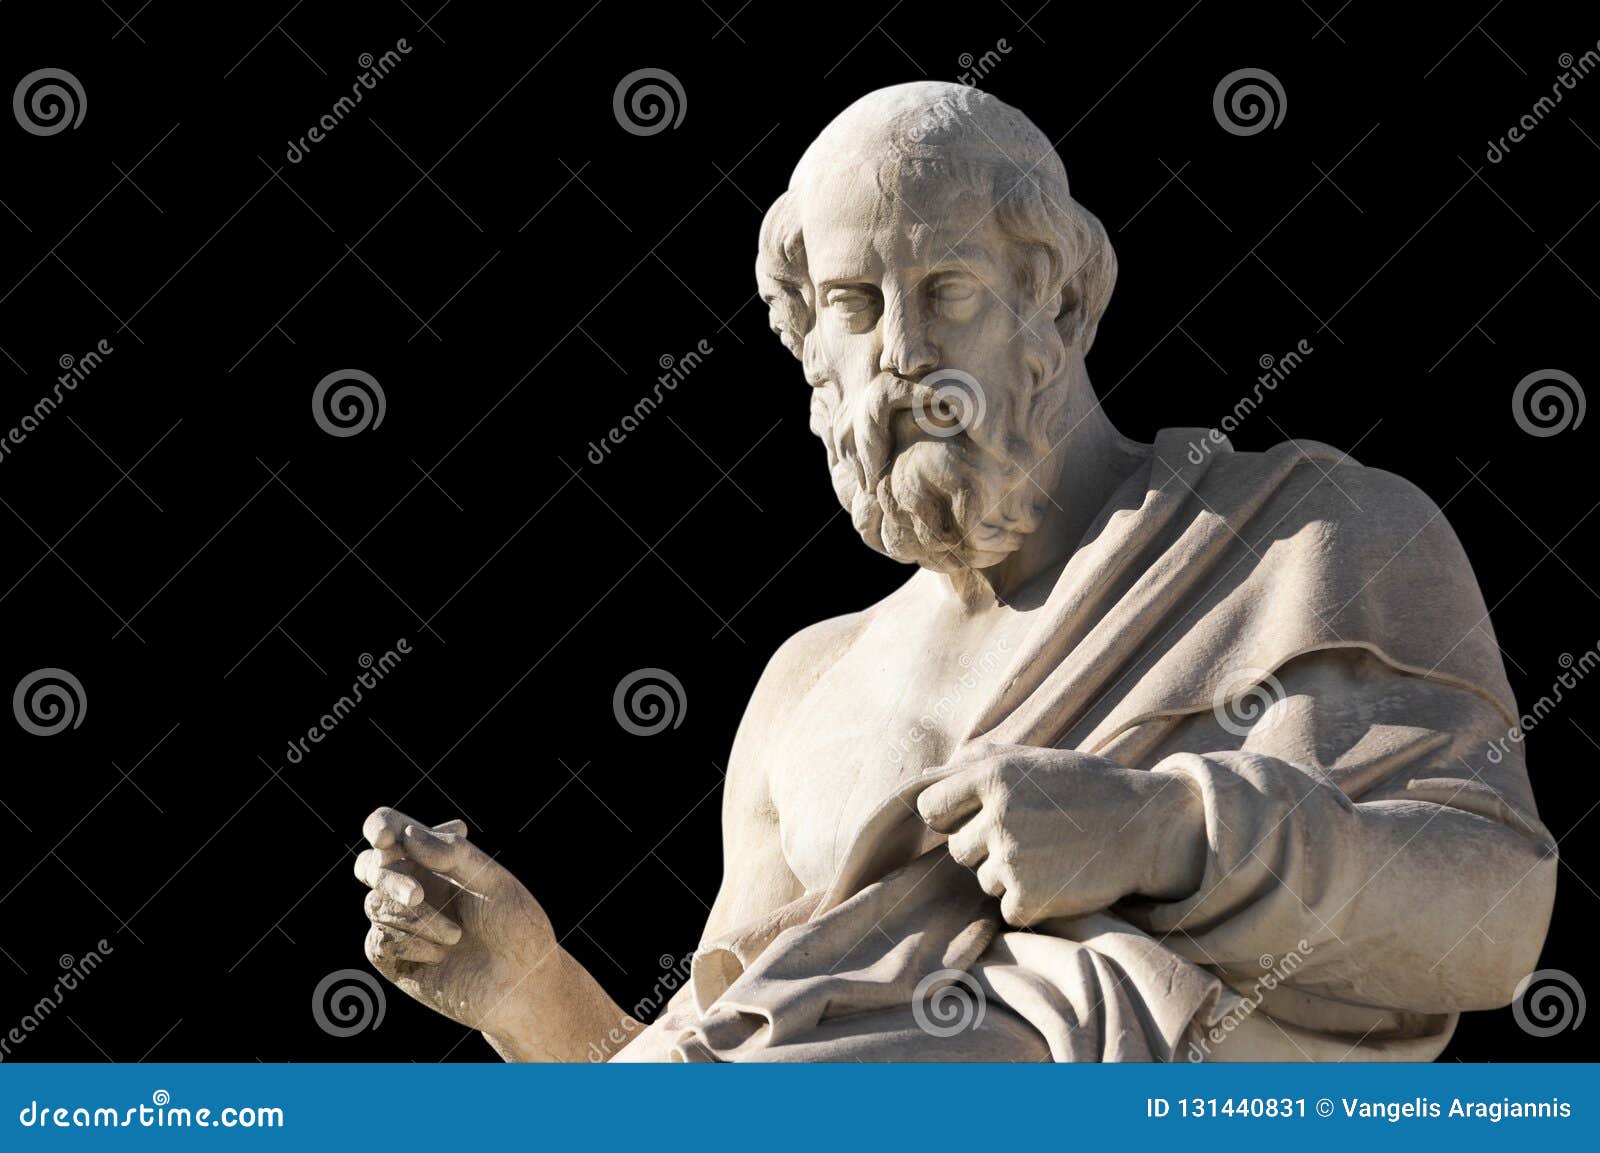 classic statue of plato from side close up